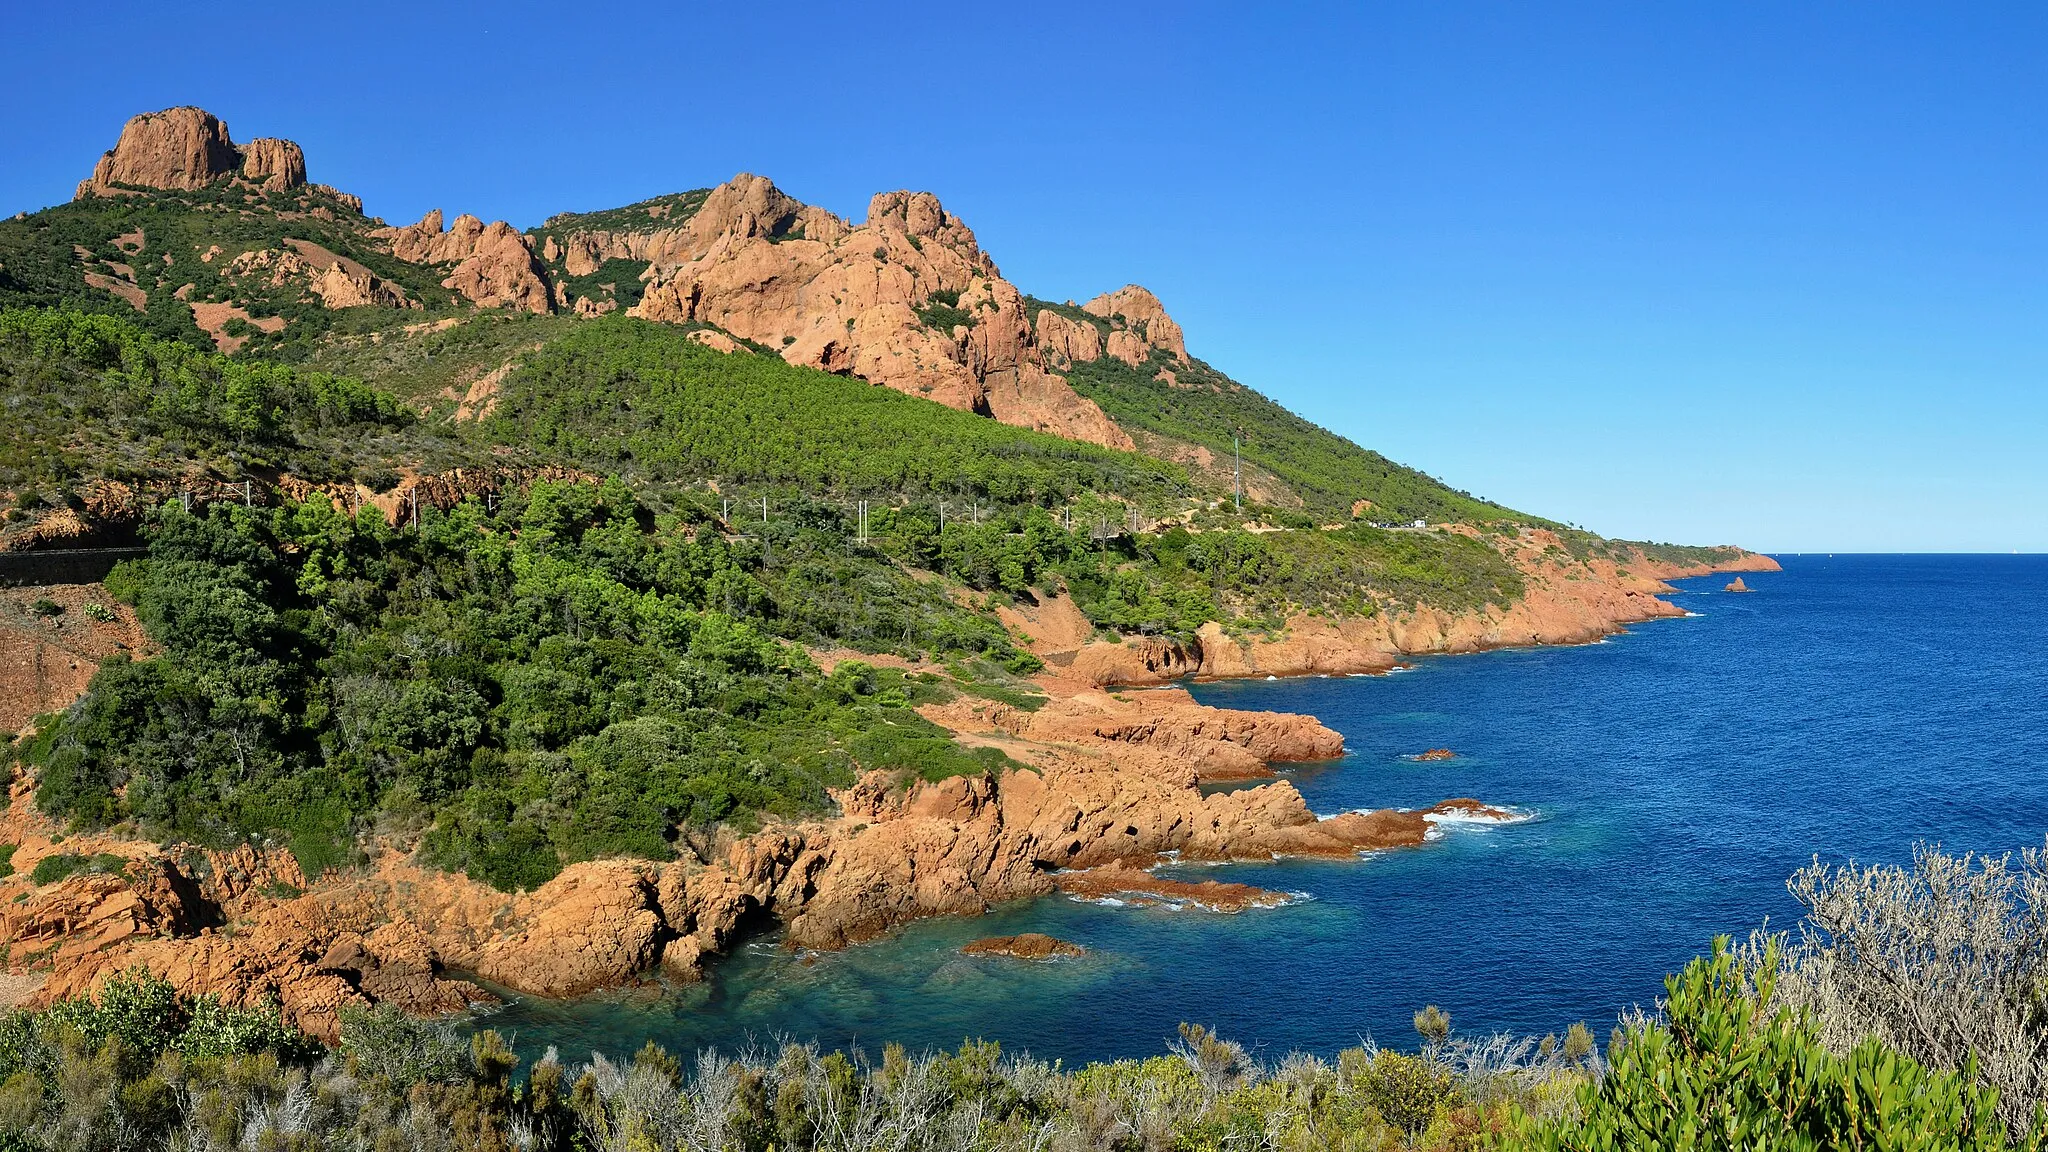 Photo showing: The calanque (cliff bay) of Petit Caneiret, in Anthéor near Saint-Raphaël, which can be found at the foot of the Massif de l’Esterel in the French Riviera (Var, Provence-Alpes-Côte d’Azur, France).